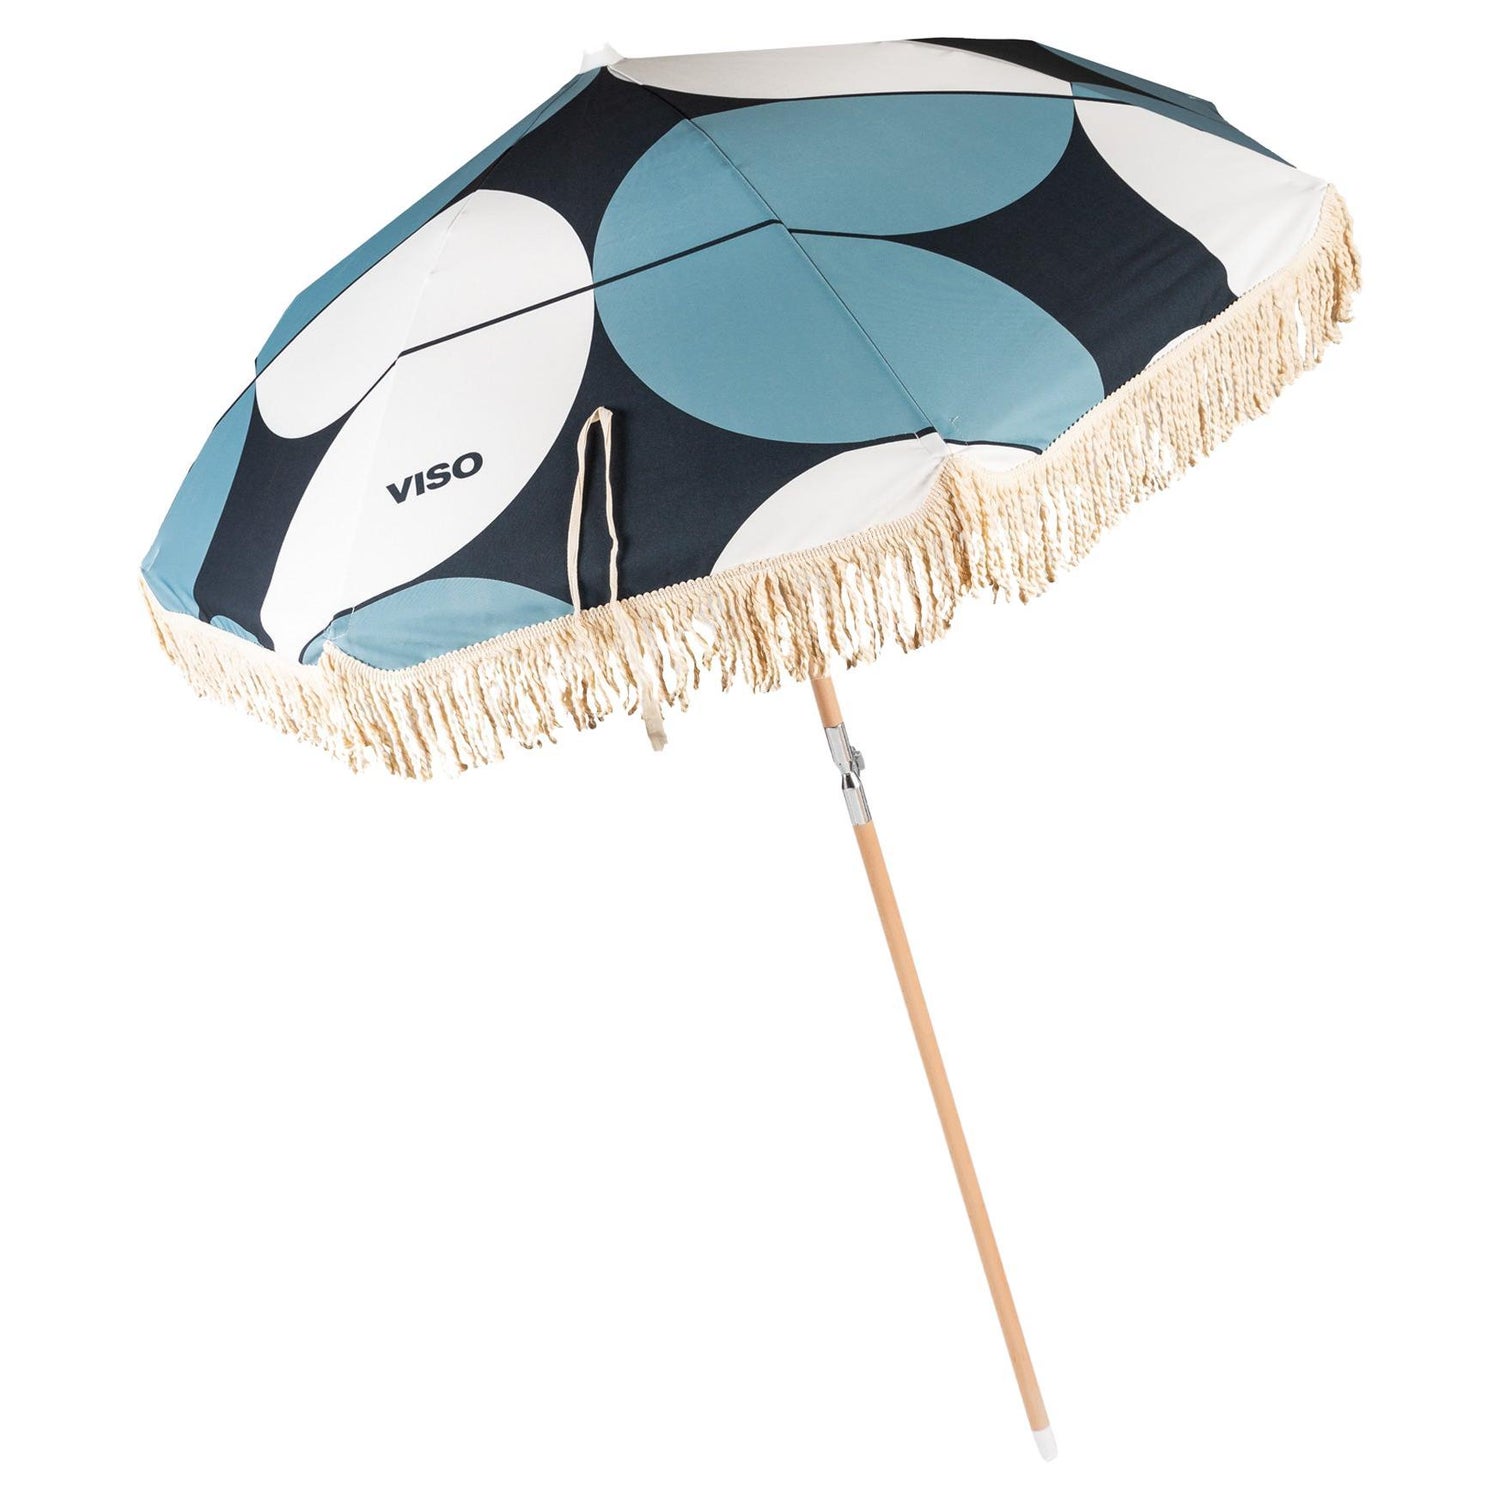 Viso Beach Umbrella 0103 in Canvas and Wood Pole For Sale at 1stDibs |  wooden pole beach umbrella